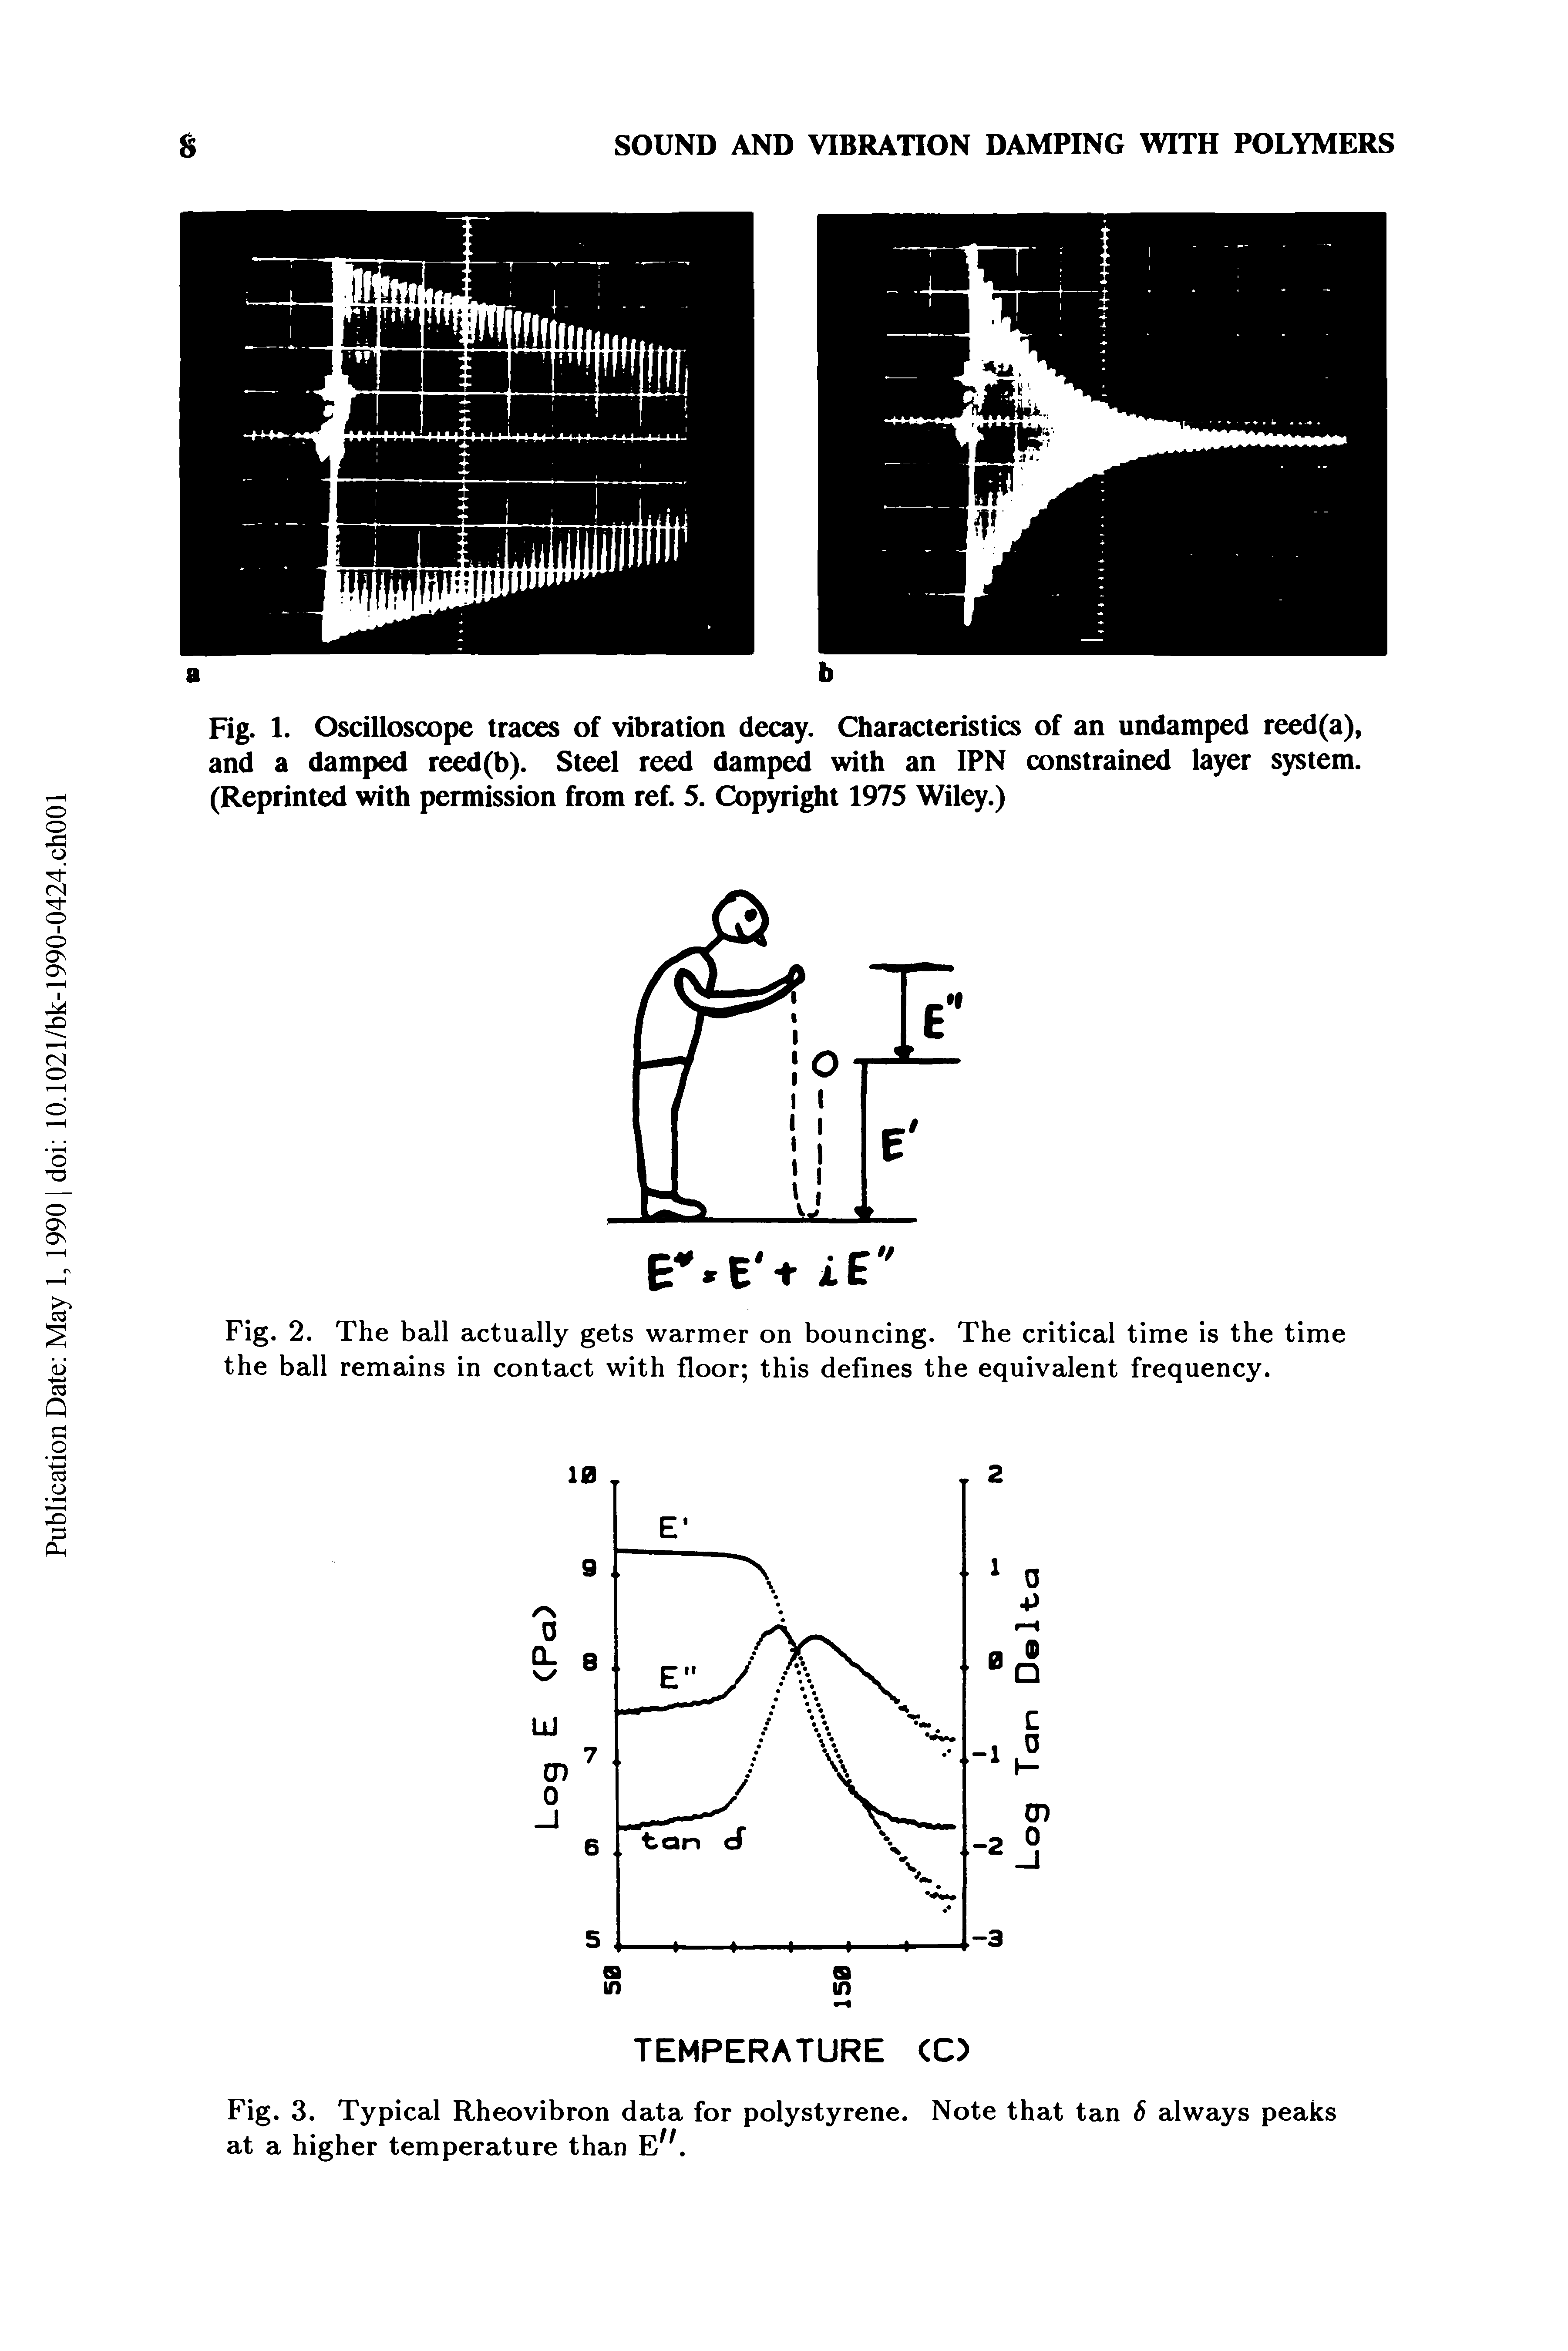 Fig. 1. Oscilloscope traces of vibration decay. Characteristics of an undamped reed(a), and a damped reed(b). Steel reed damped with an IPN constrained layer system. (Reprinted with permission from ref. 5. Copyright 1975 Wiley.)...